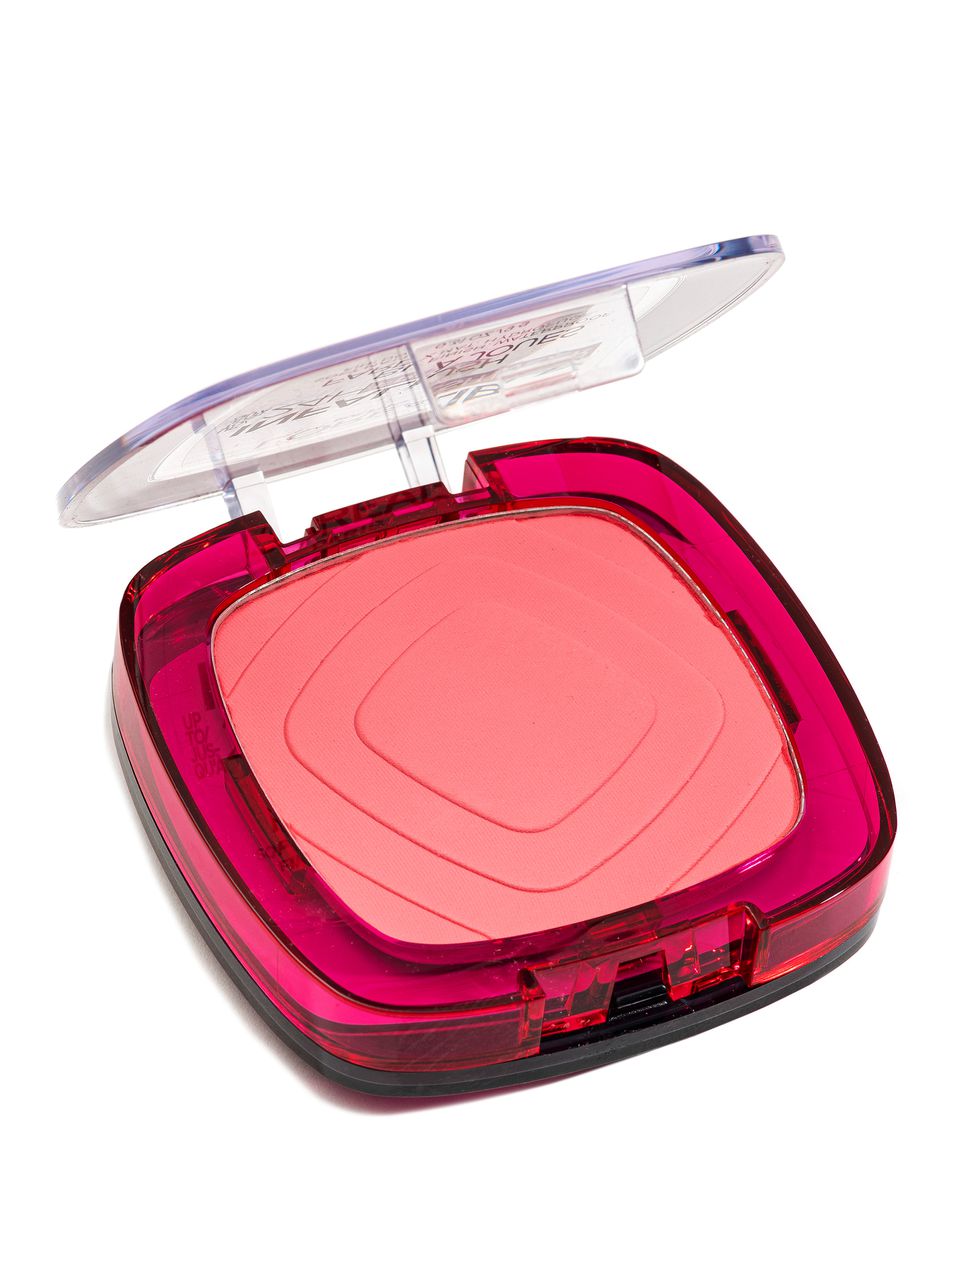 L'OREAL INFALLIBLE BLUSH IN 10